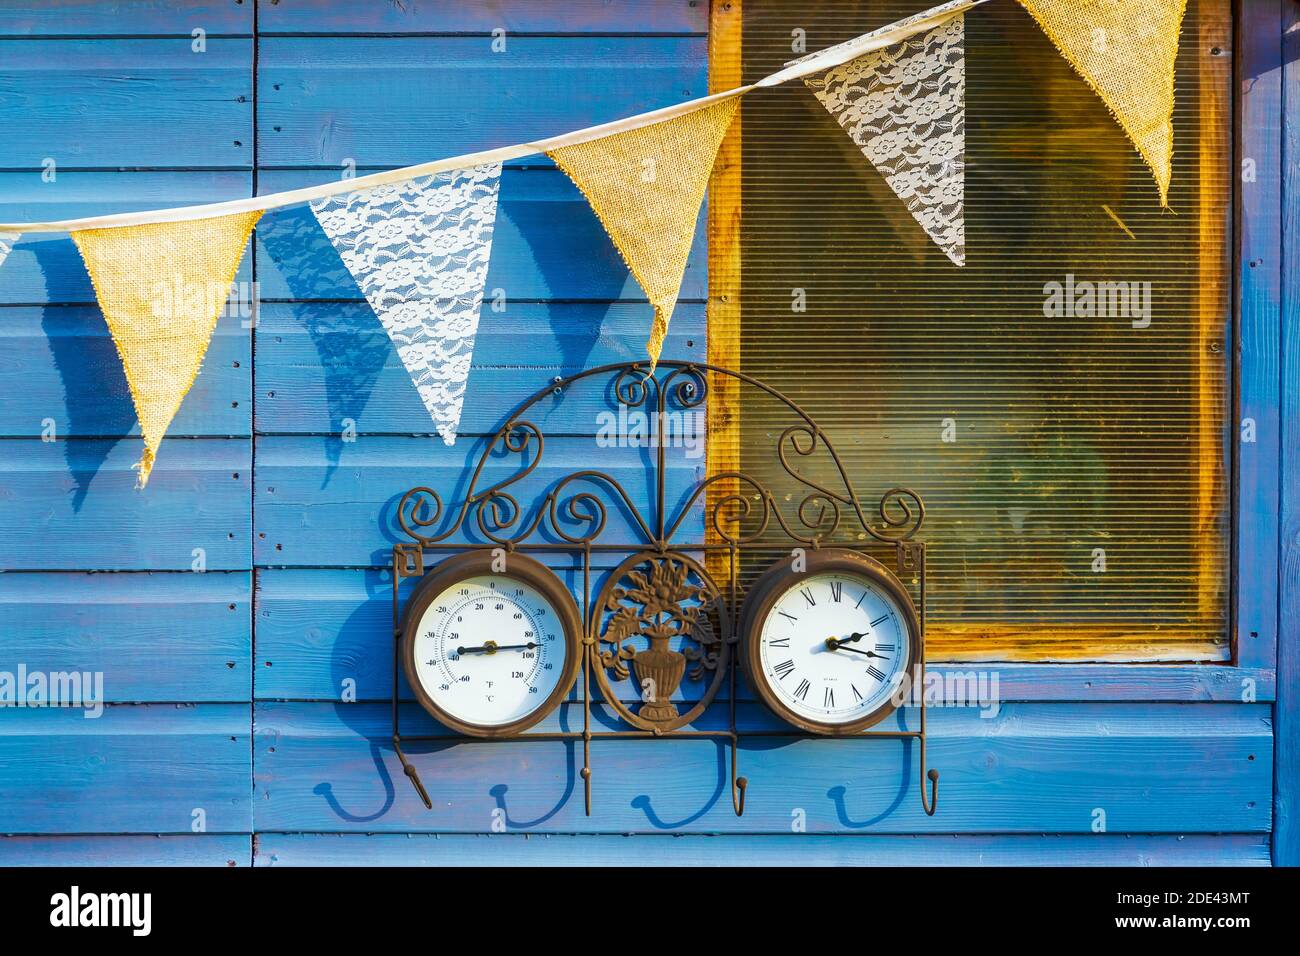 Exterior of a garden shed with bunting and a clock and weather thermometer, Garden, Kilwinning, Ayrshire, Scotland, UK Stock Photo